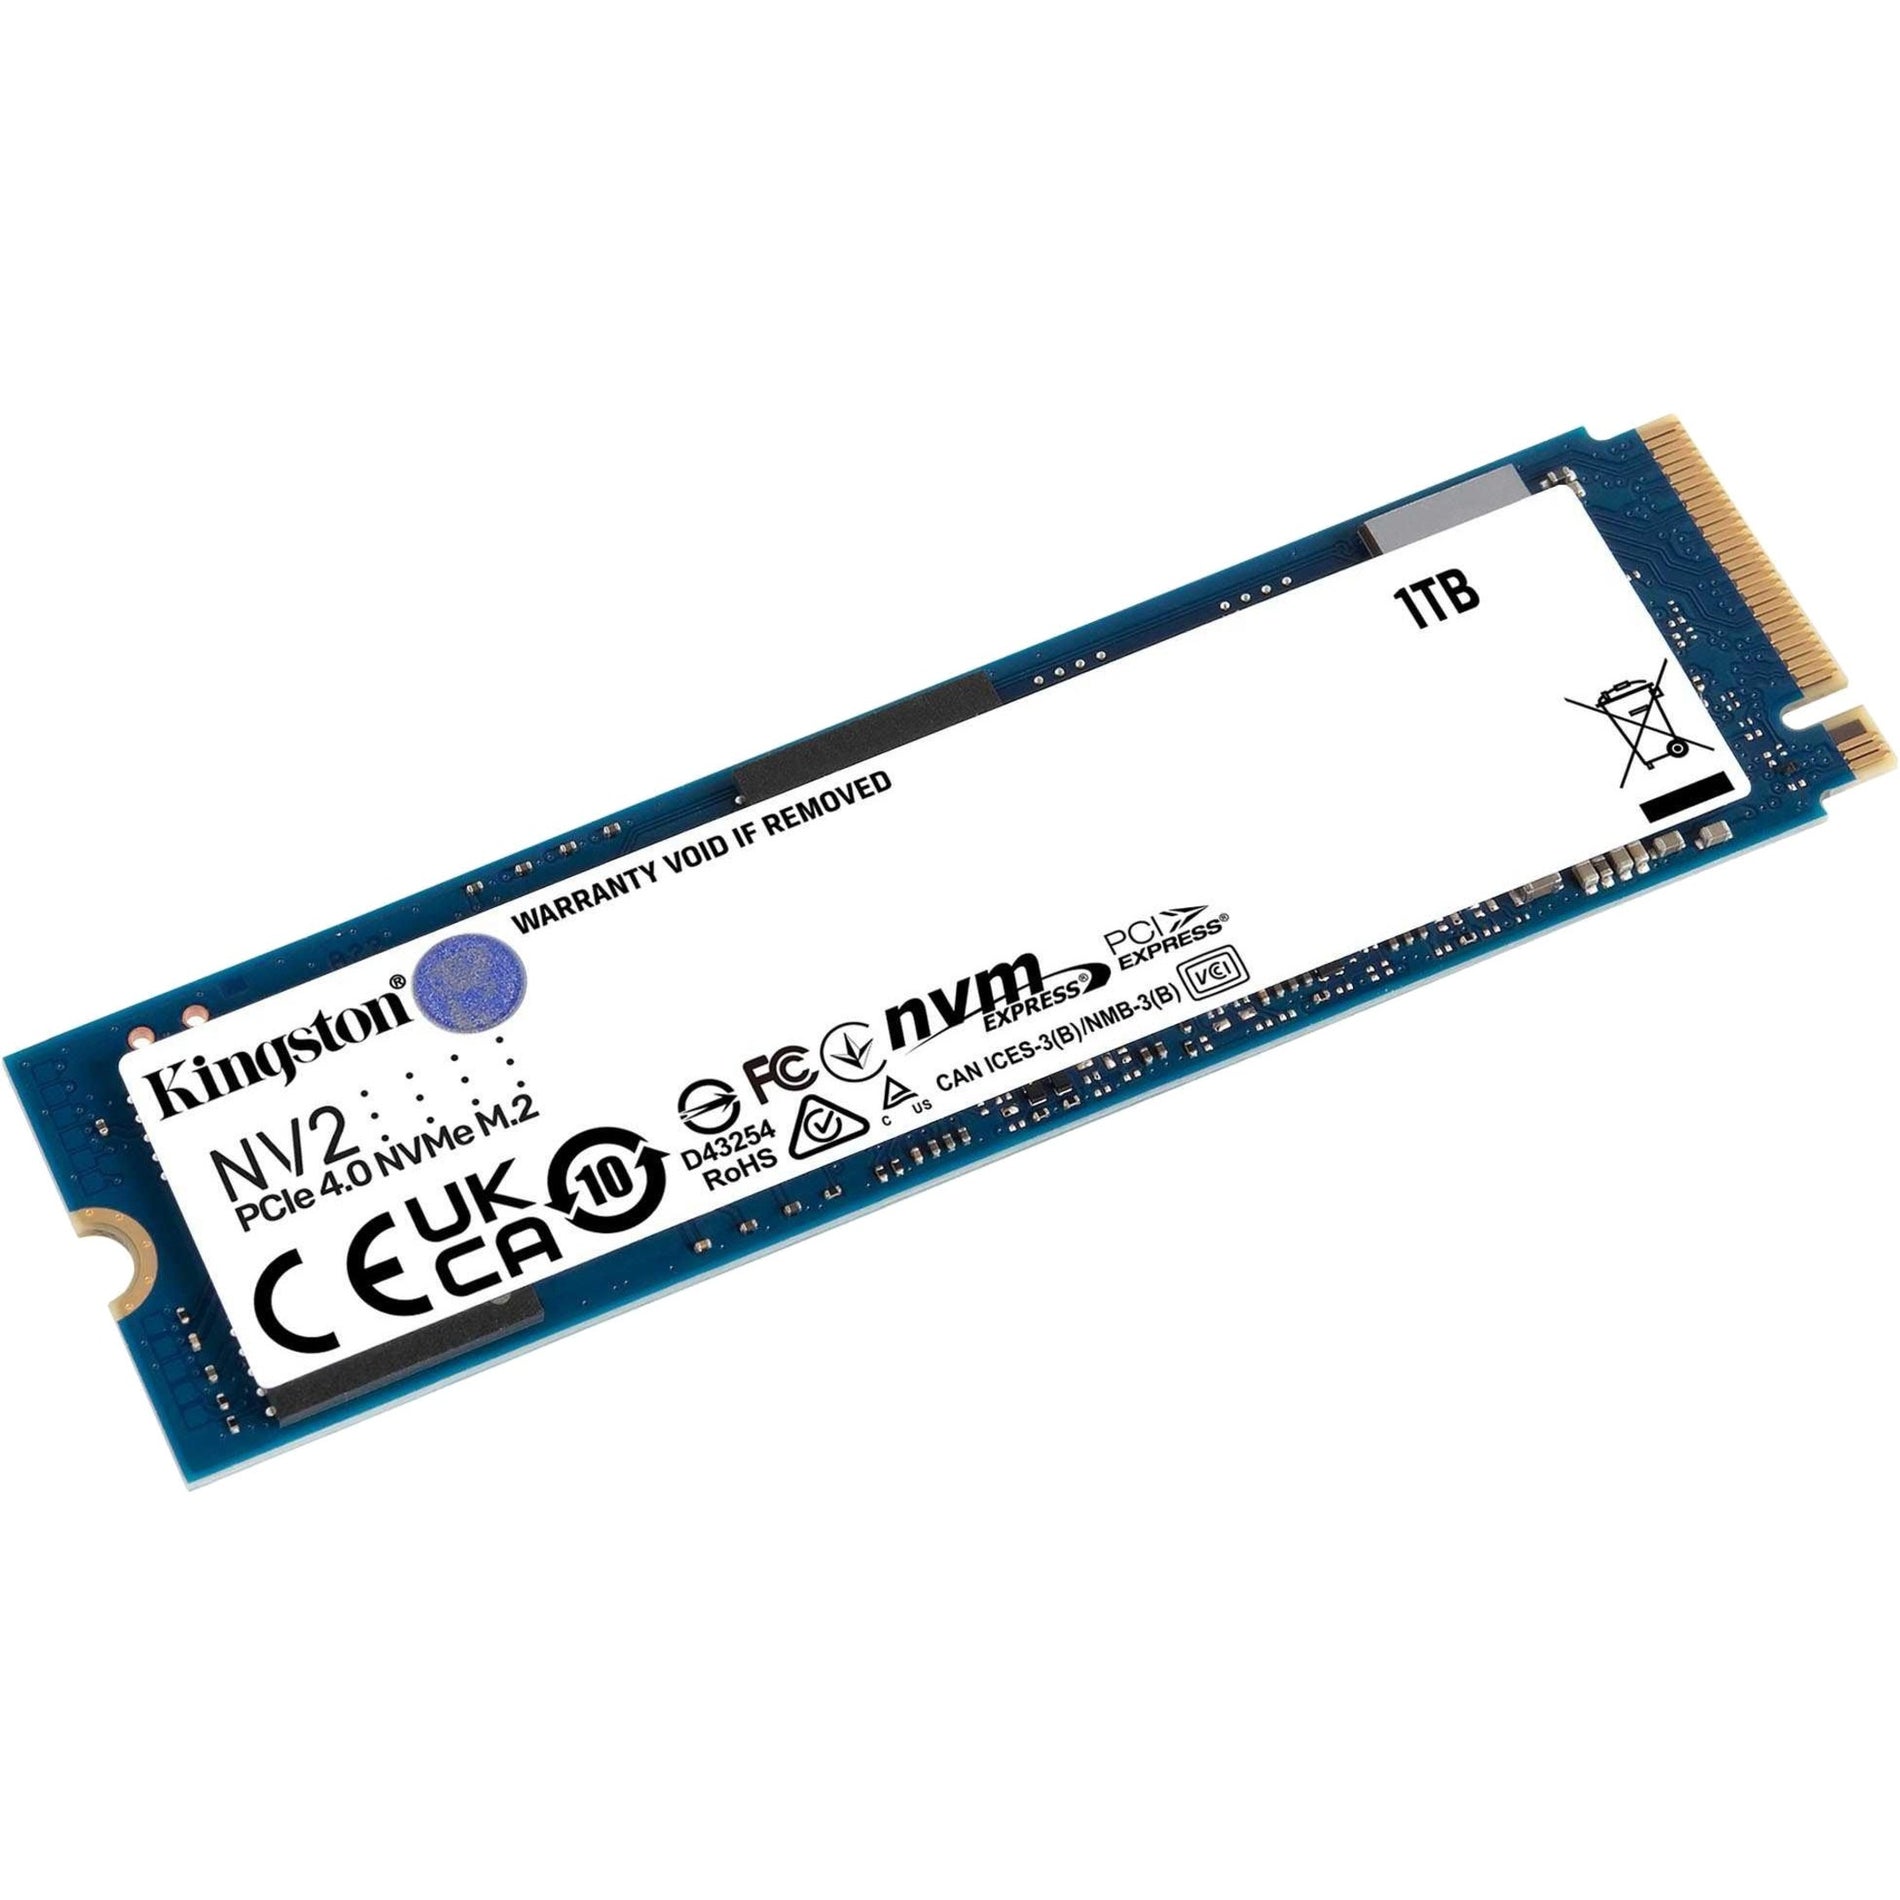 Kingston SNV2S/1000G NV2 PCIe 4.0 NVMe SSD, 1TB M.2 2280 Internal Solid State Drive, Up to 3500 MB/s